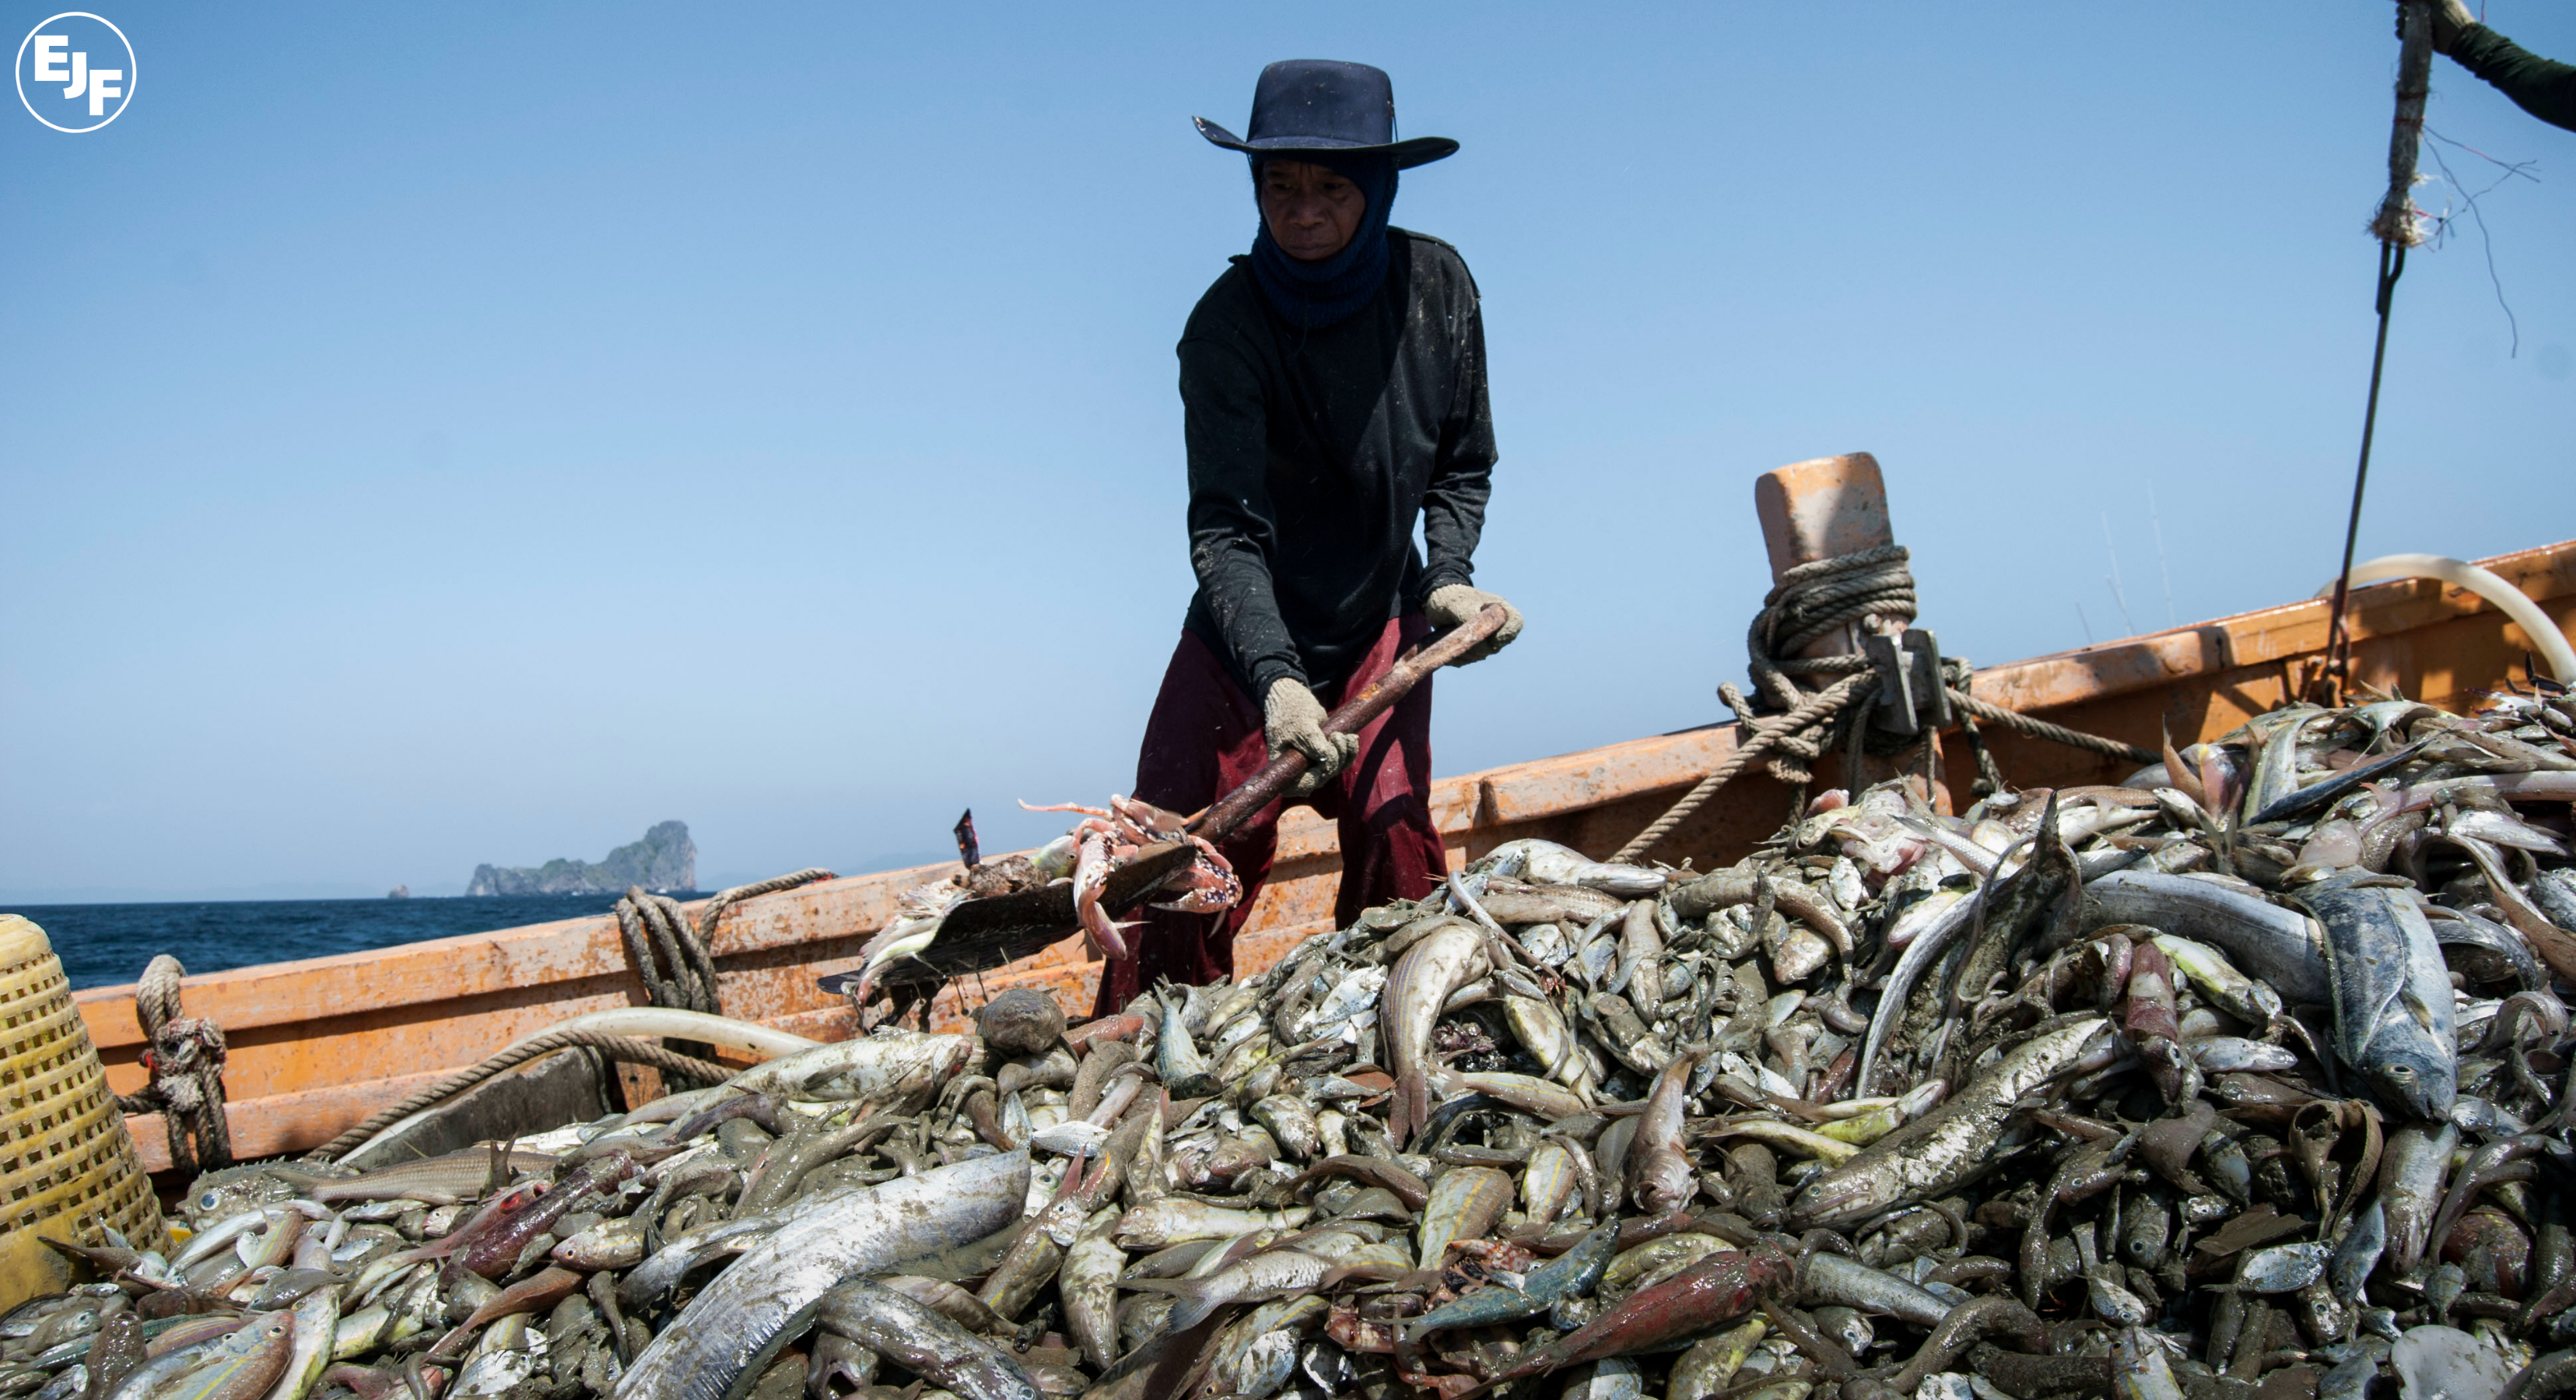 EJF presents updates on anti-slavery work at seafood ethics event